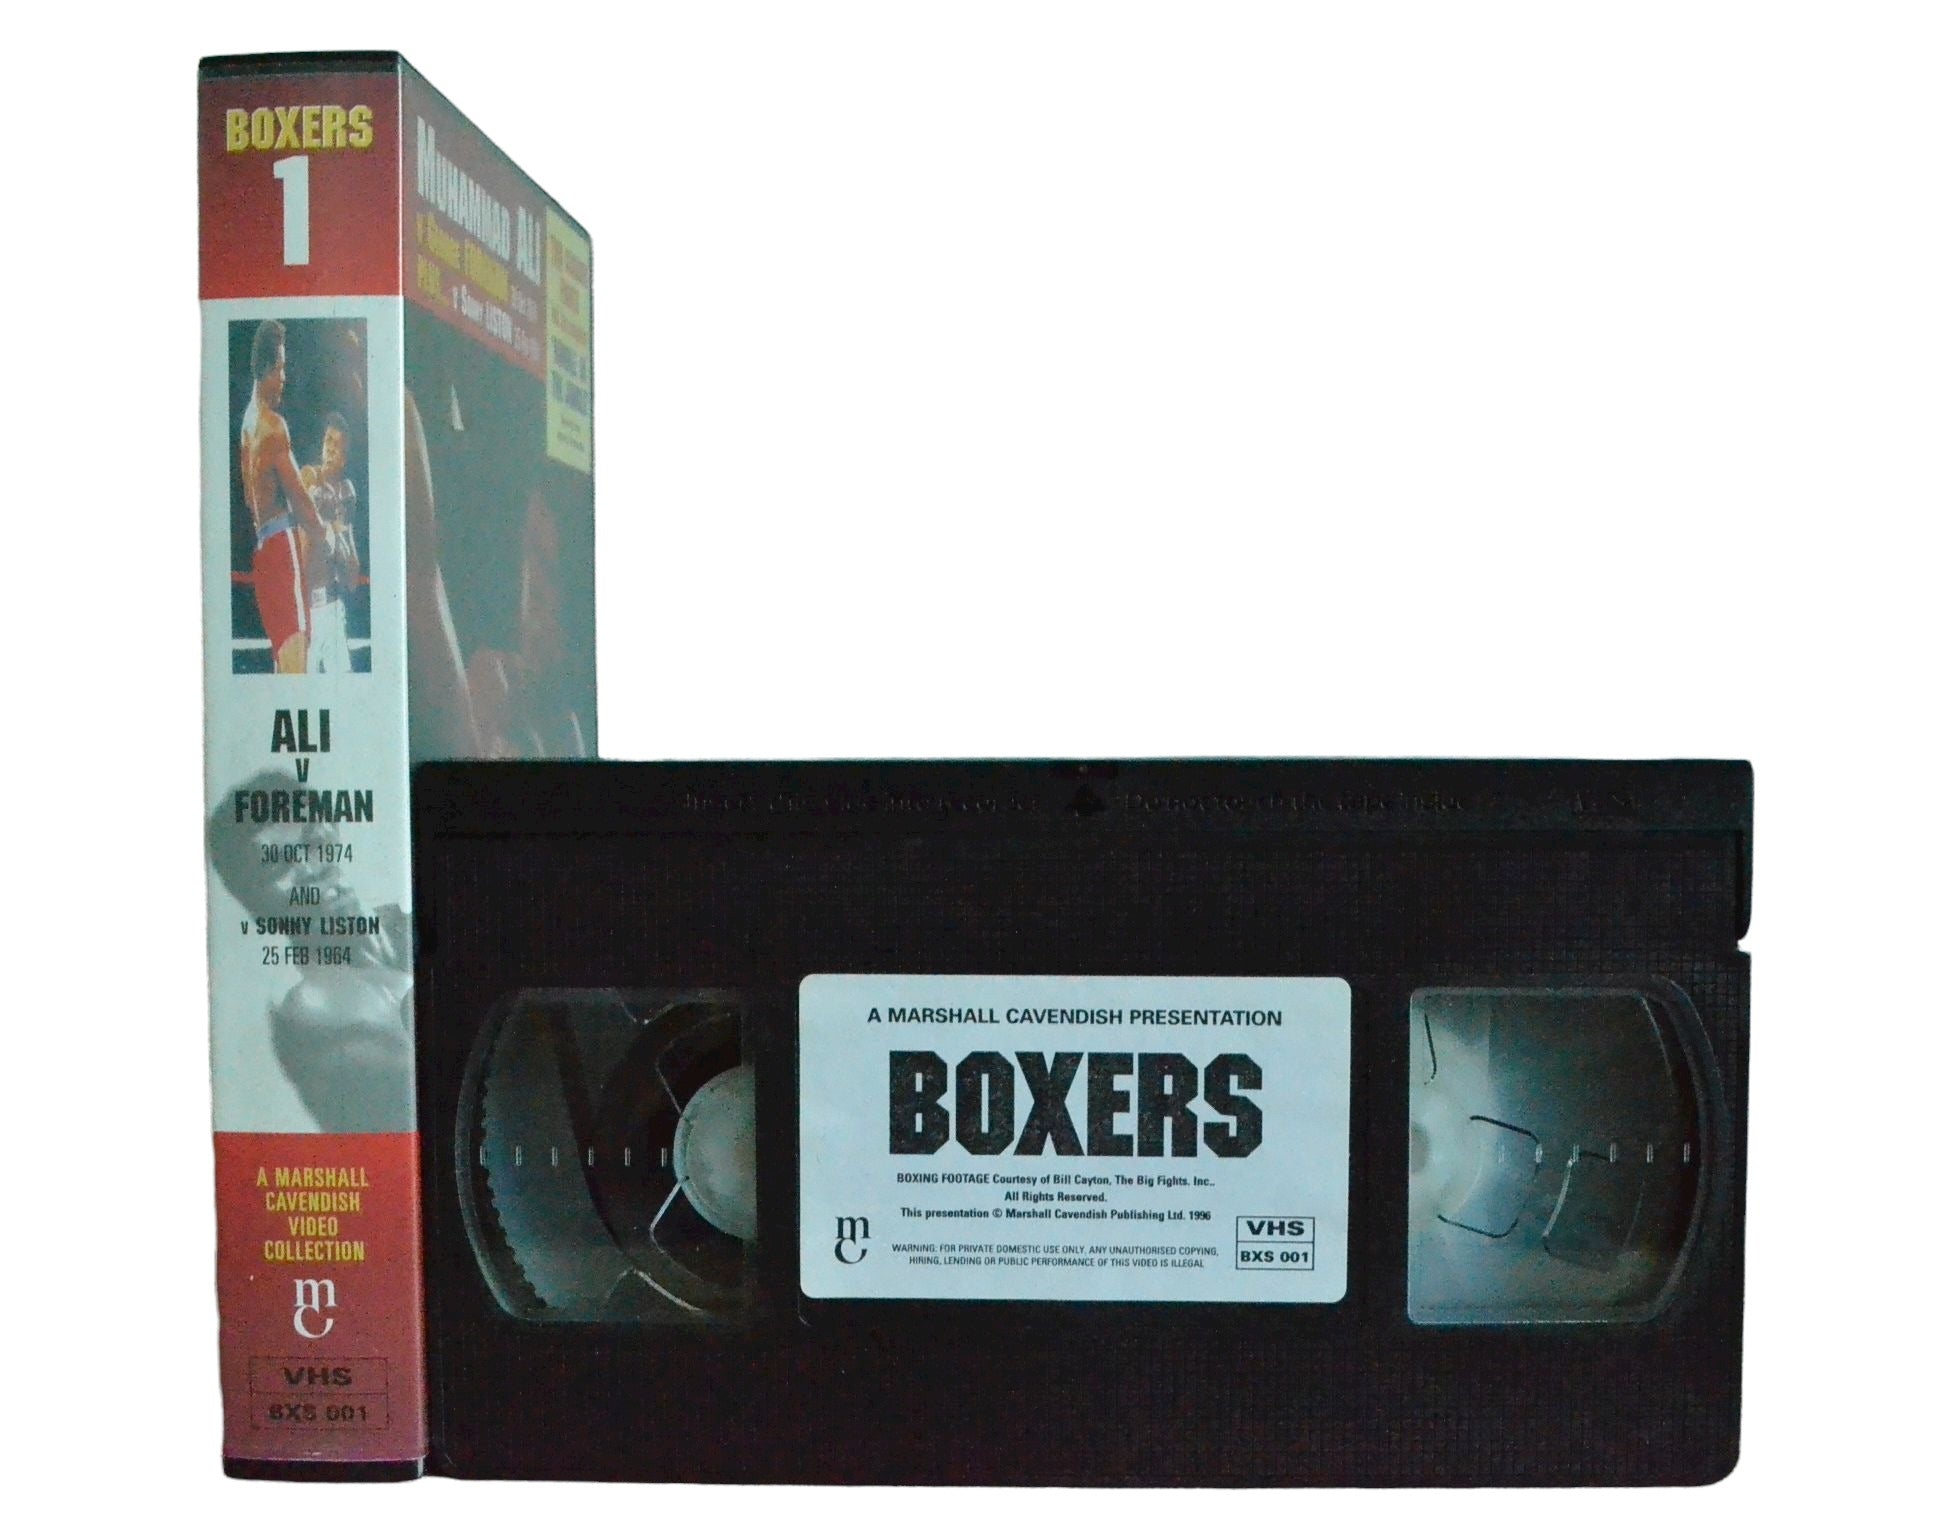 Muhammad Ali - Boxers - A Marshall Cavendish Video Collection - Muhammad Ali - Boxer 1 - Boxing - Pal VHS-